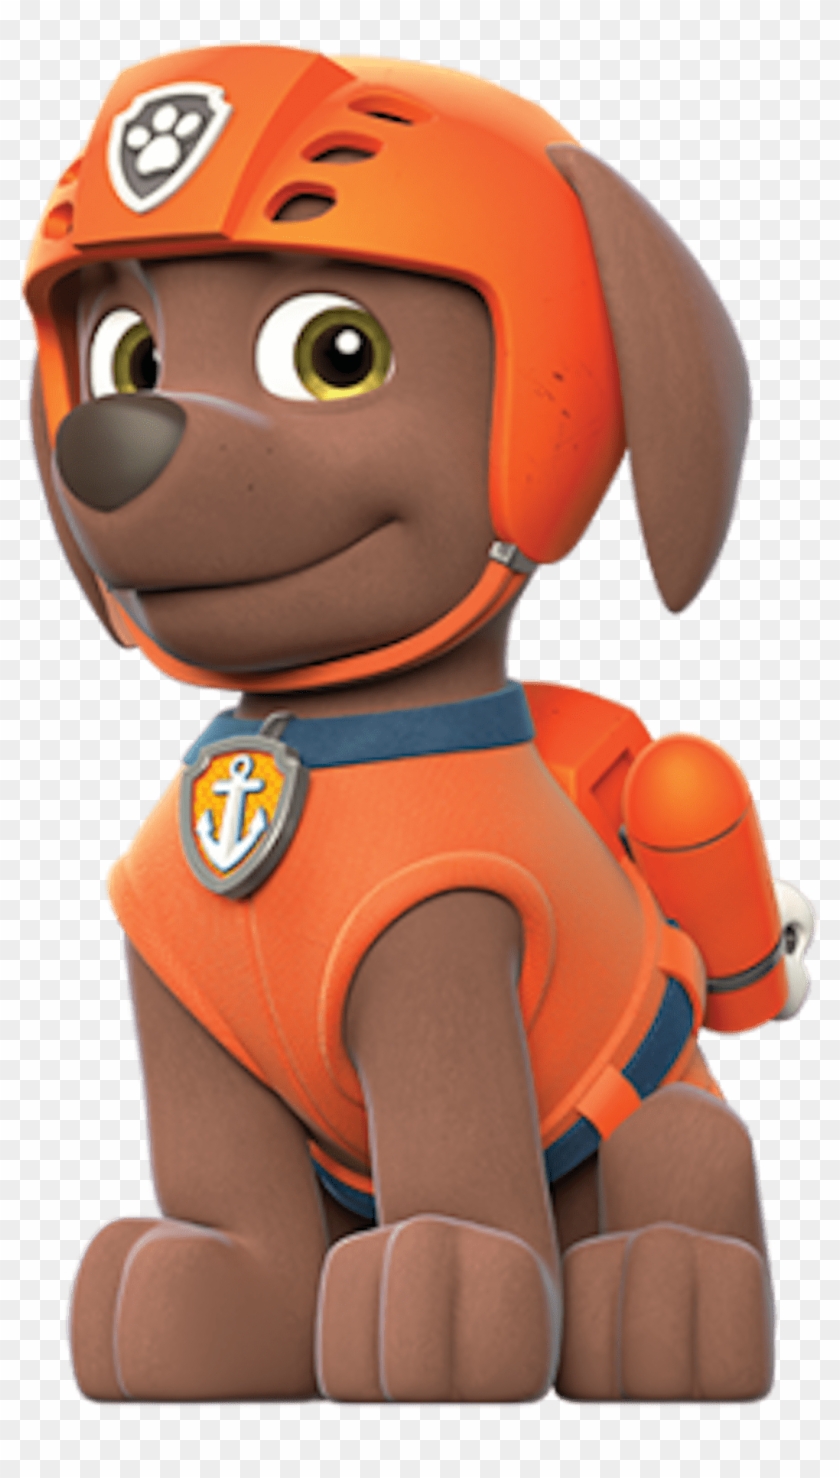 Zuma Paw Patrol Clip Art Pictures To Pin On Pinterest - Zuma Paw Patrol Png Transparent Png #228919